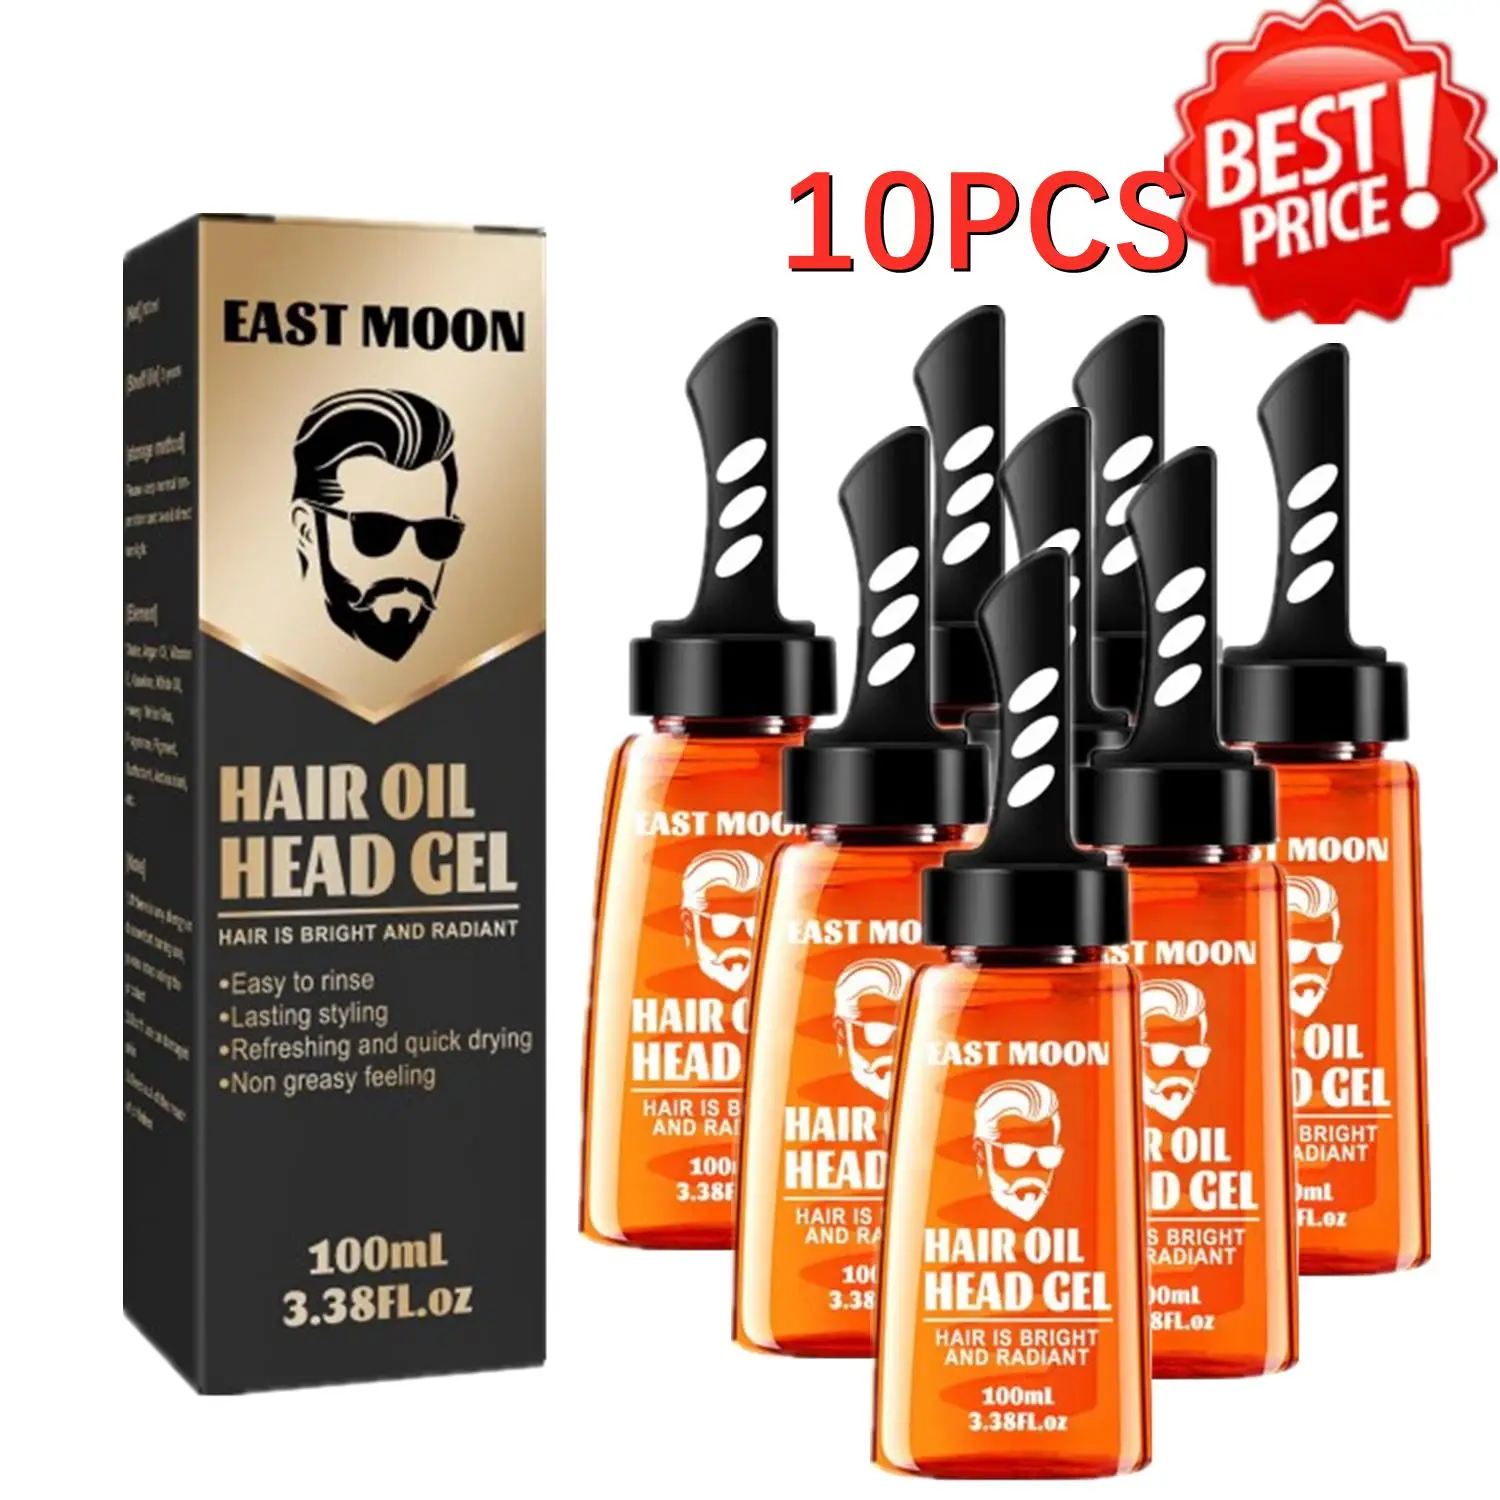 10pcs Men Hair Wax Gel With Comb Lasting Hold Cream Drying Hair Gel Oil Pomade Styling Hair Hair Oil Quick Fluffy Wax 100ML 10pcs 1 4 inch hex shank magnetic power nut setters quick change power nut driver bit set magnetic hex nut driver master kit